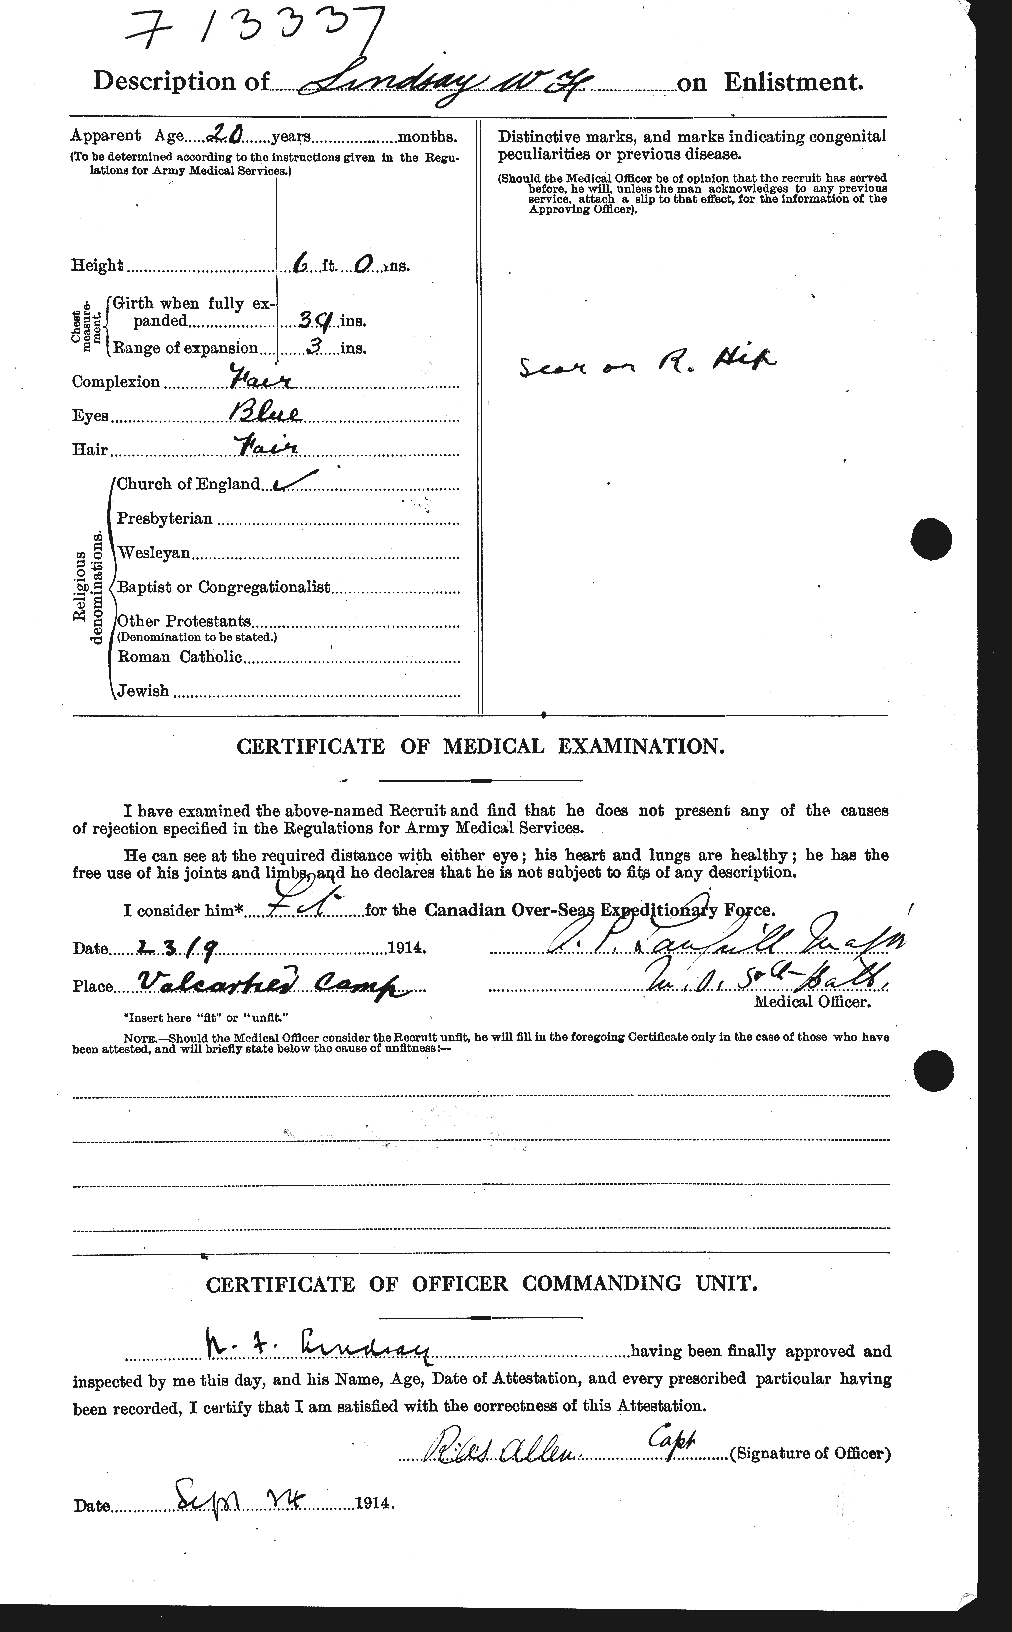 Personnel Records of the First World War - CEF 466158b